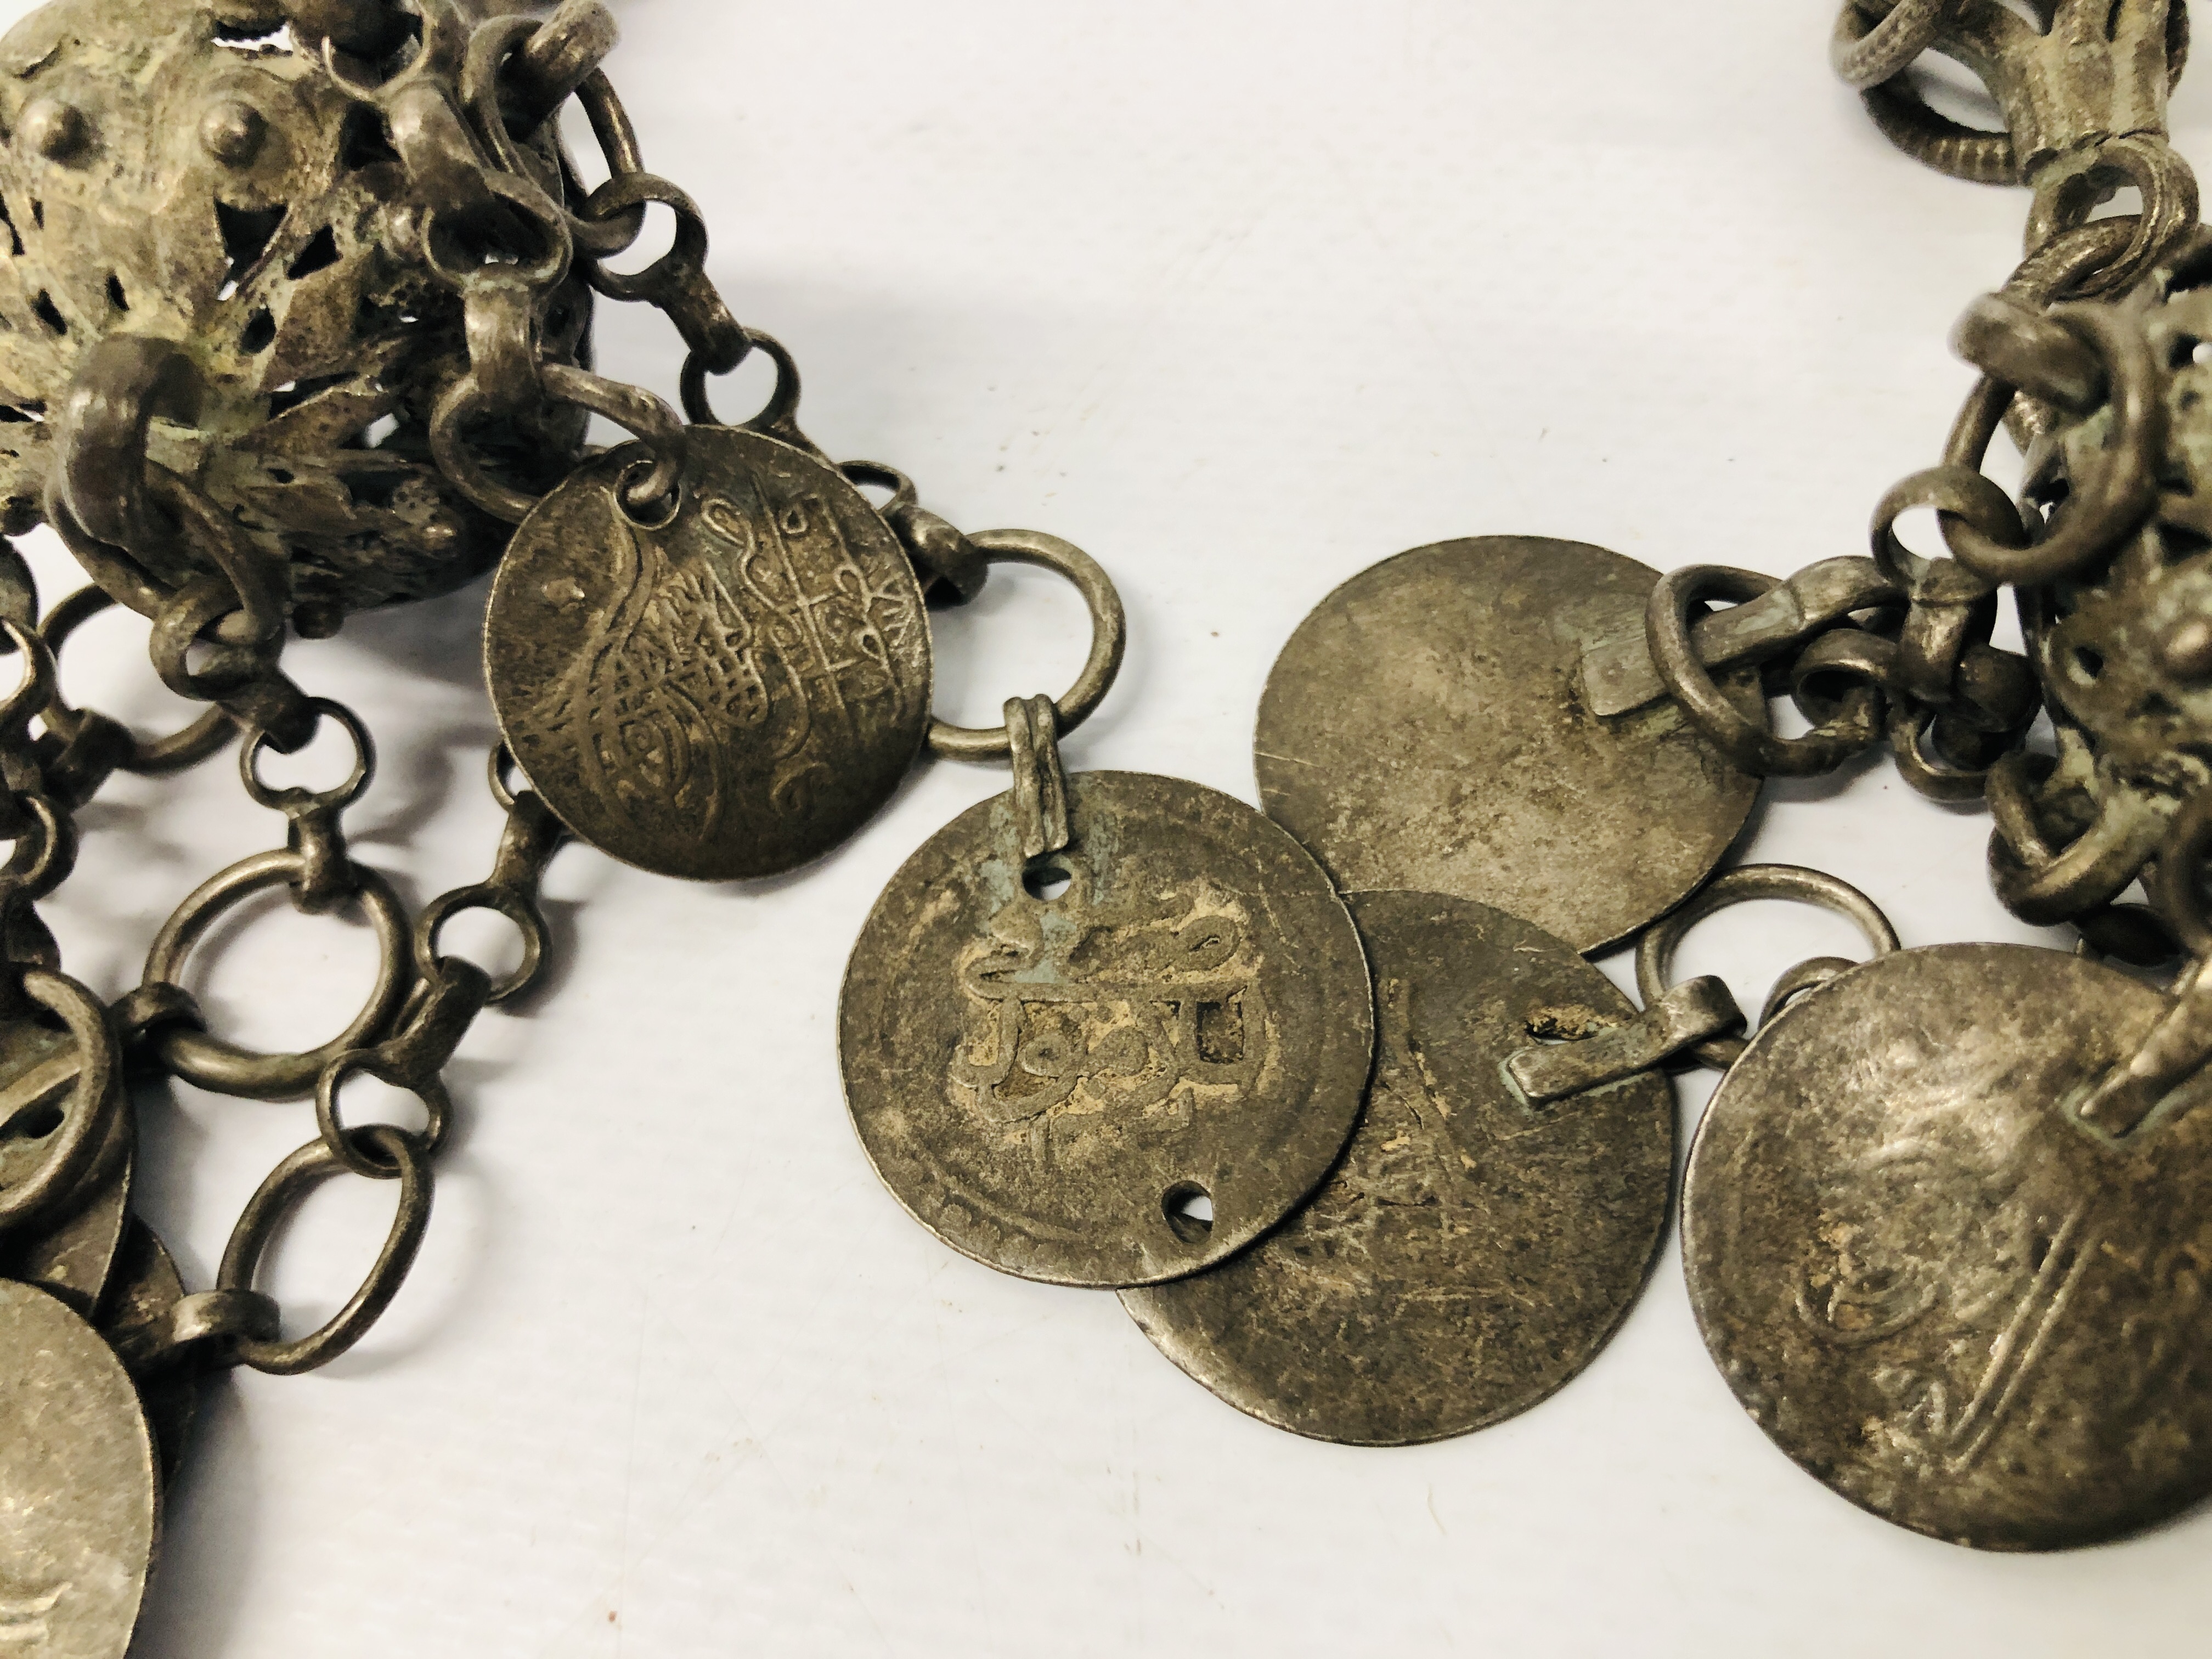 AN ANTIQUE PERSIAN DECORATIVE CHAIN WITH COIN TASSELS. - Image 3 of 6